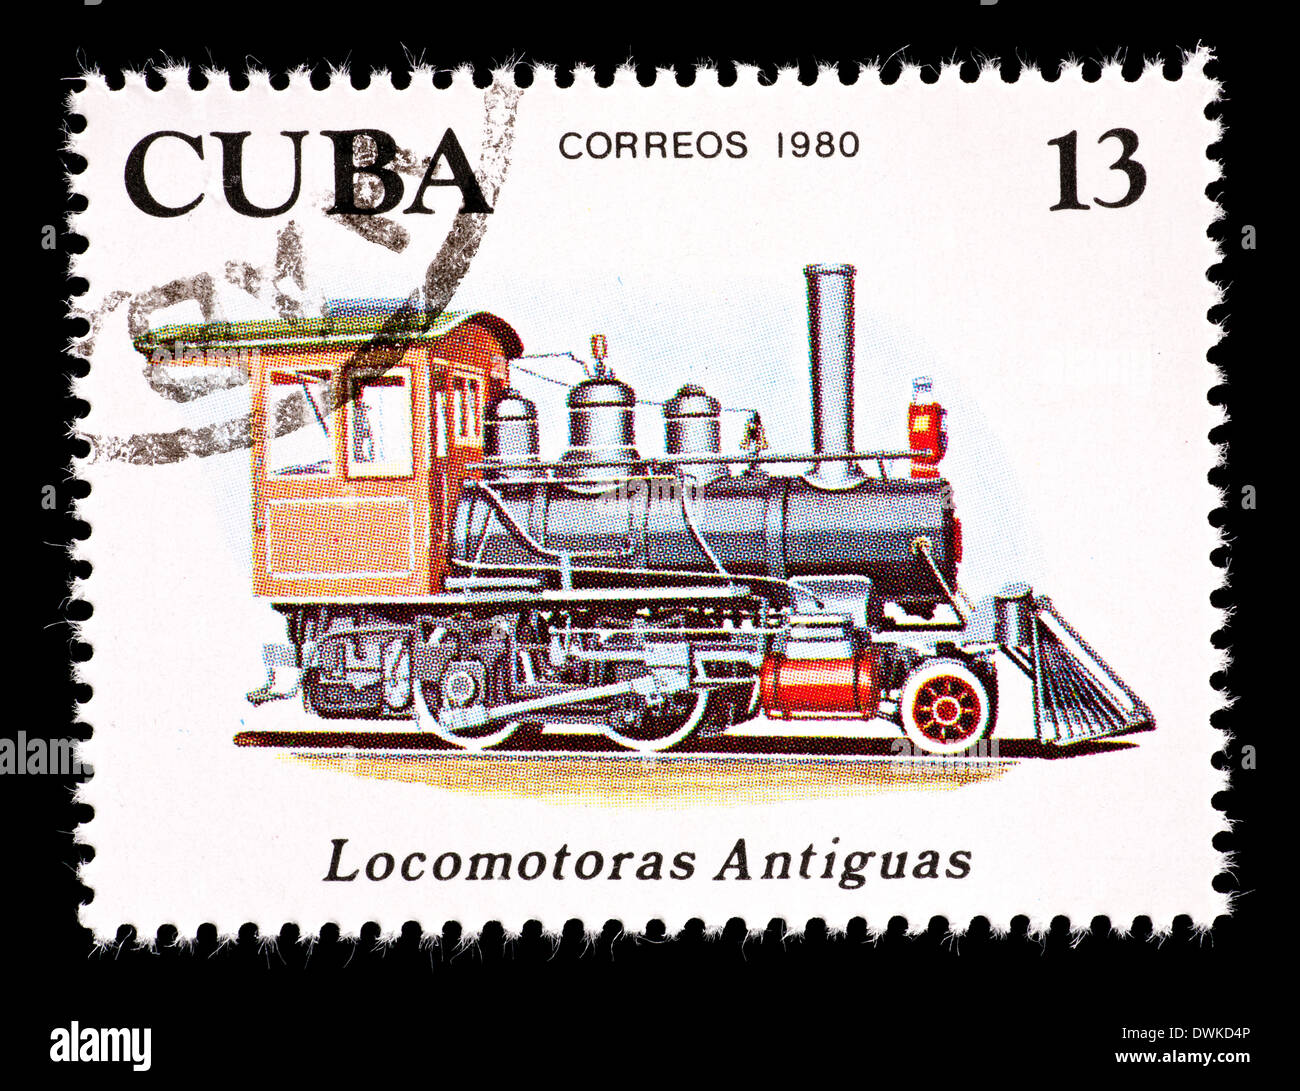 Postage stamp from Cuba depicting a historical 2-4-0 steam locomotive Stock Photo